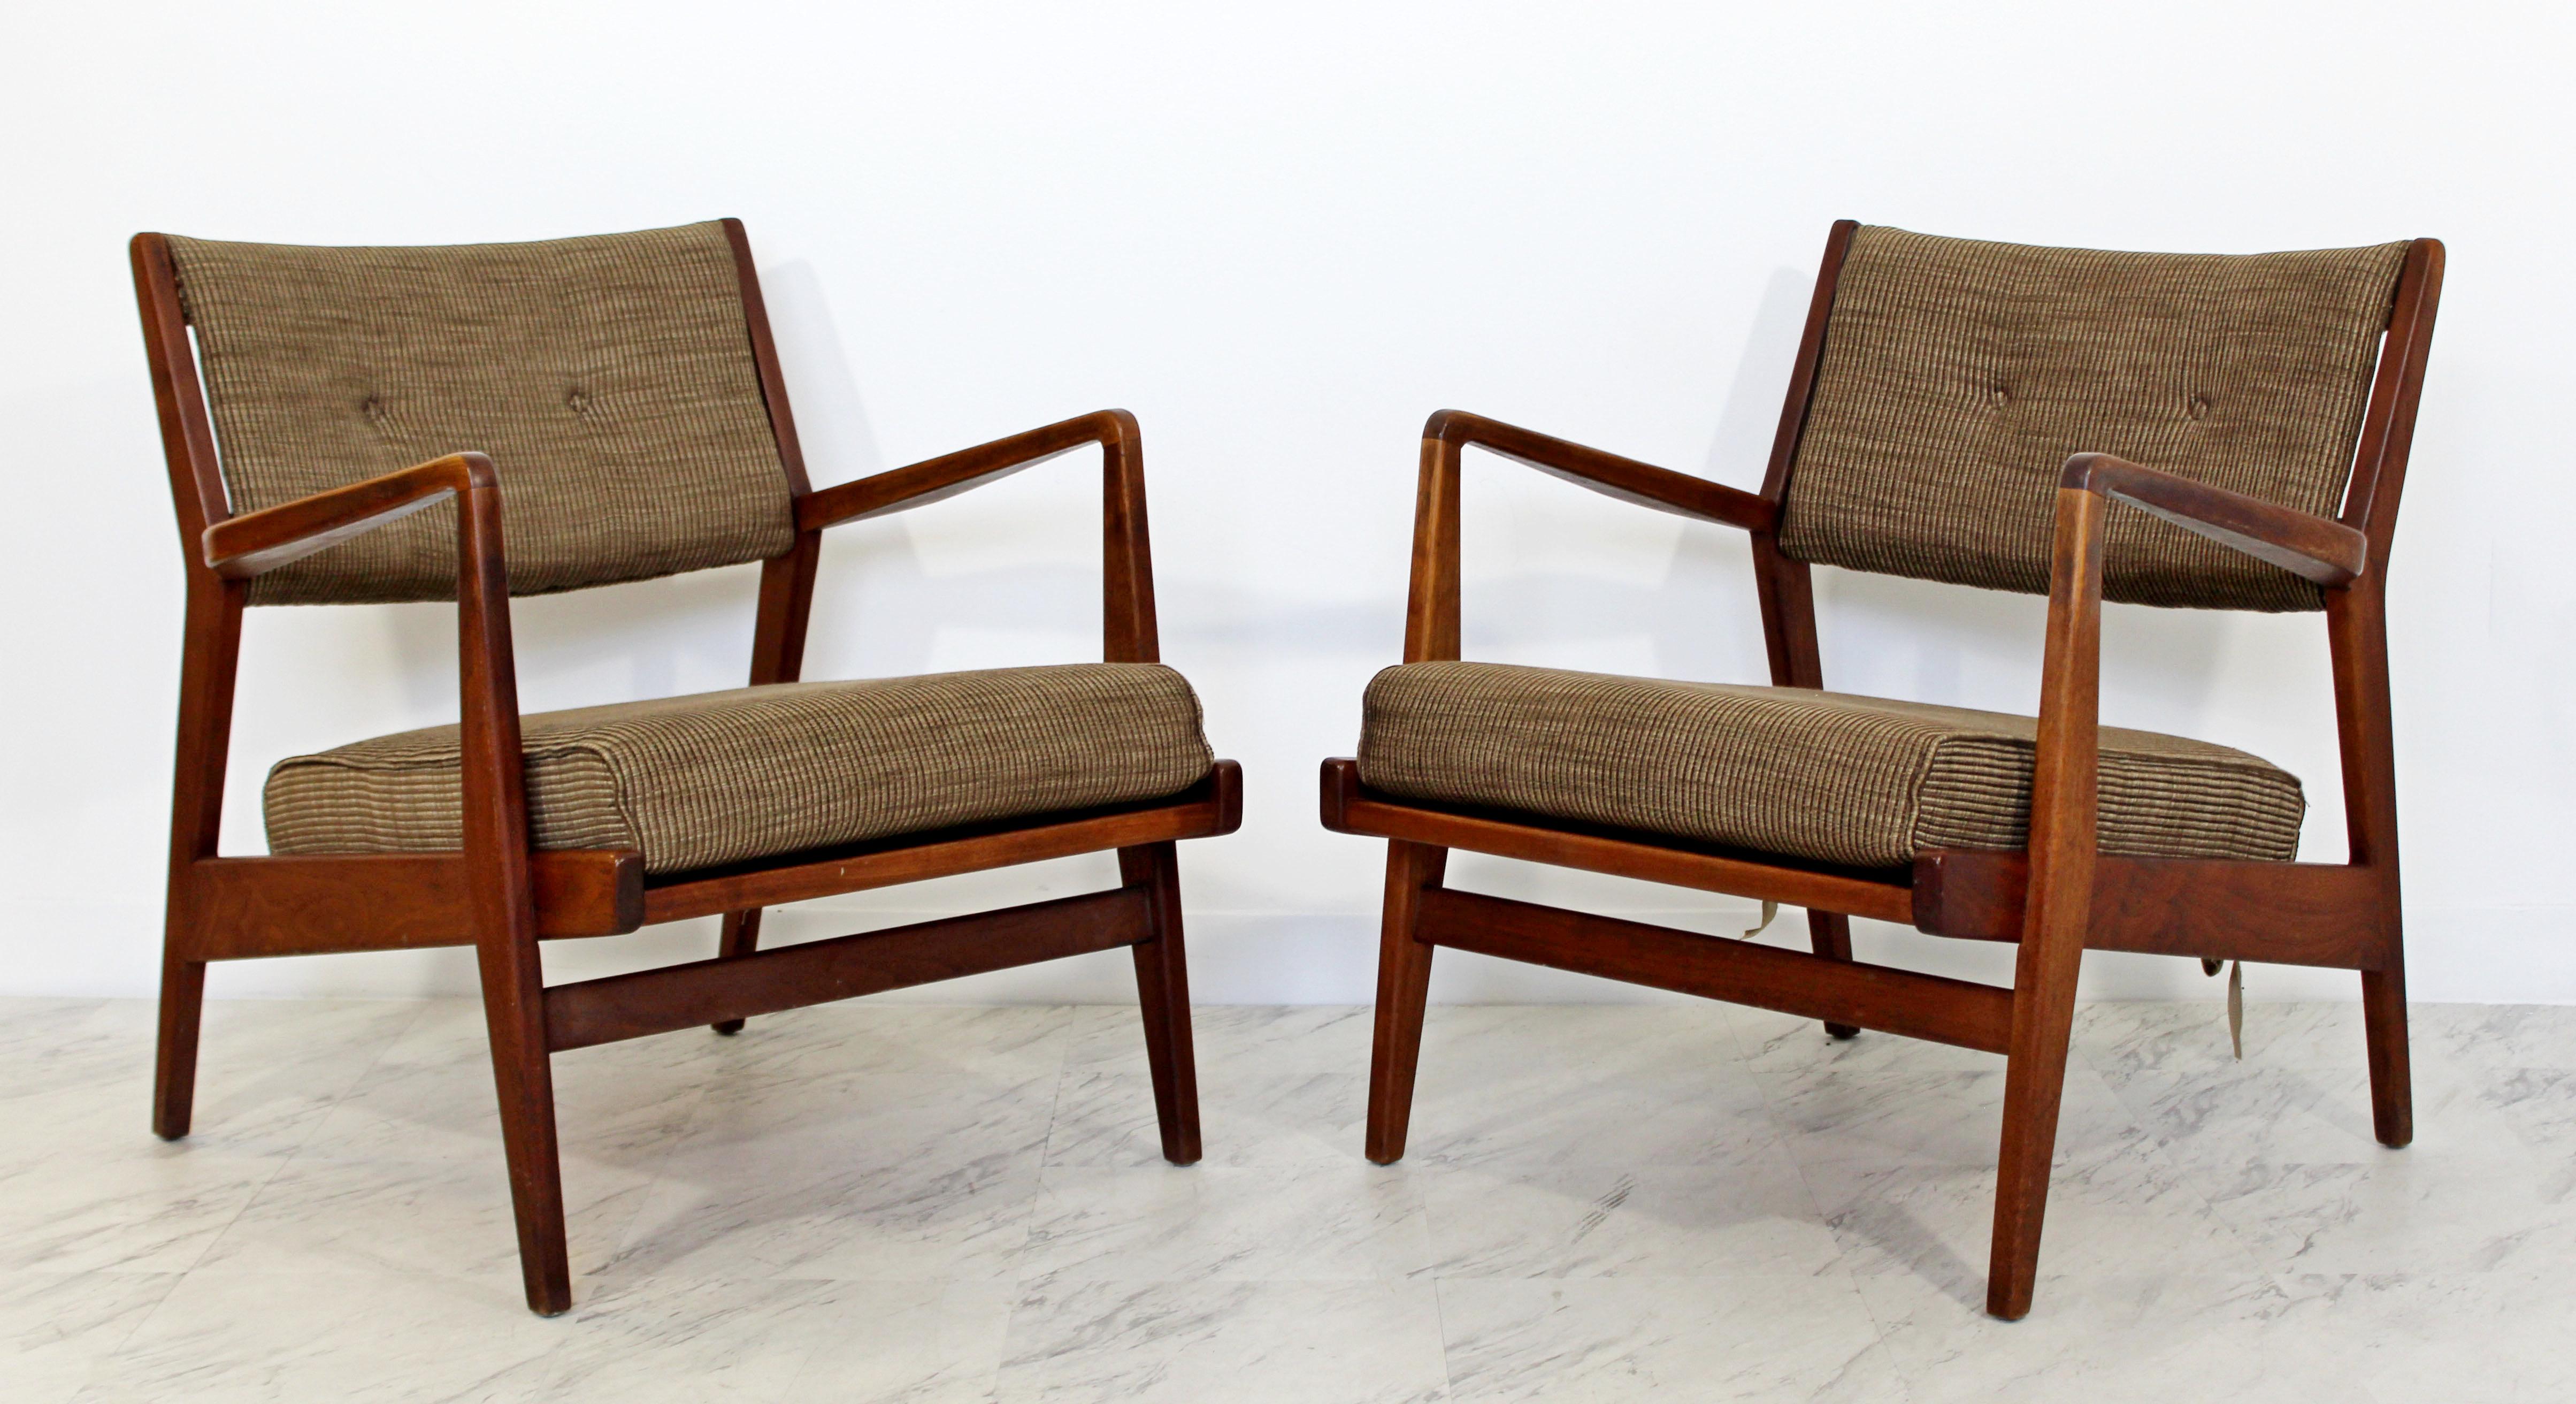 For your consideration is an original pair of lounge armchairs, made of walnut and with a tufted upholstery, by Jens Risom, circa 1960s. In excellent condition. The dimensions are 26.5